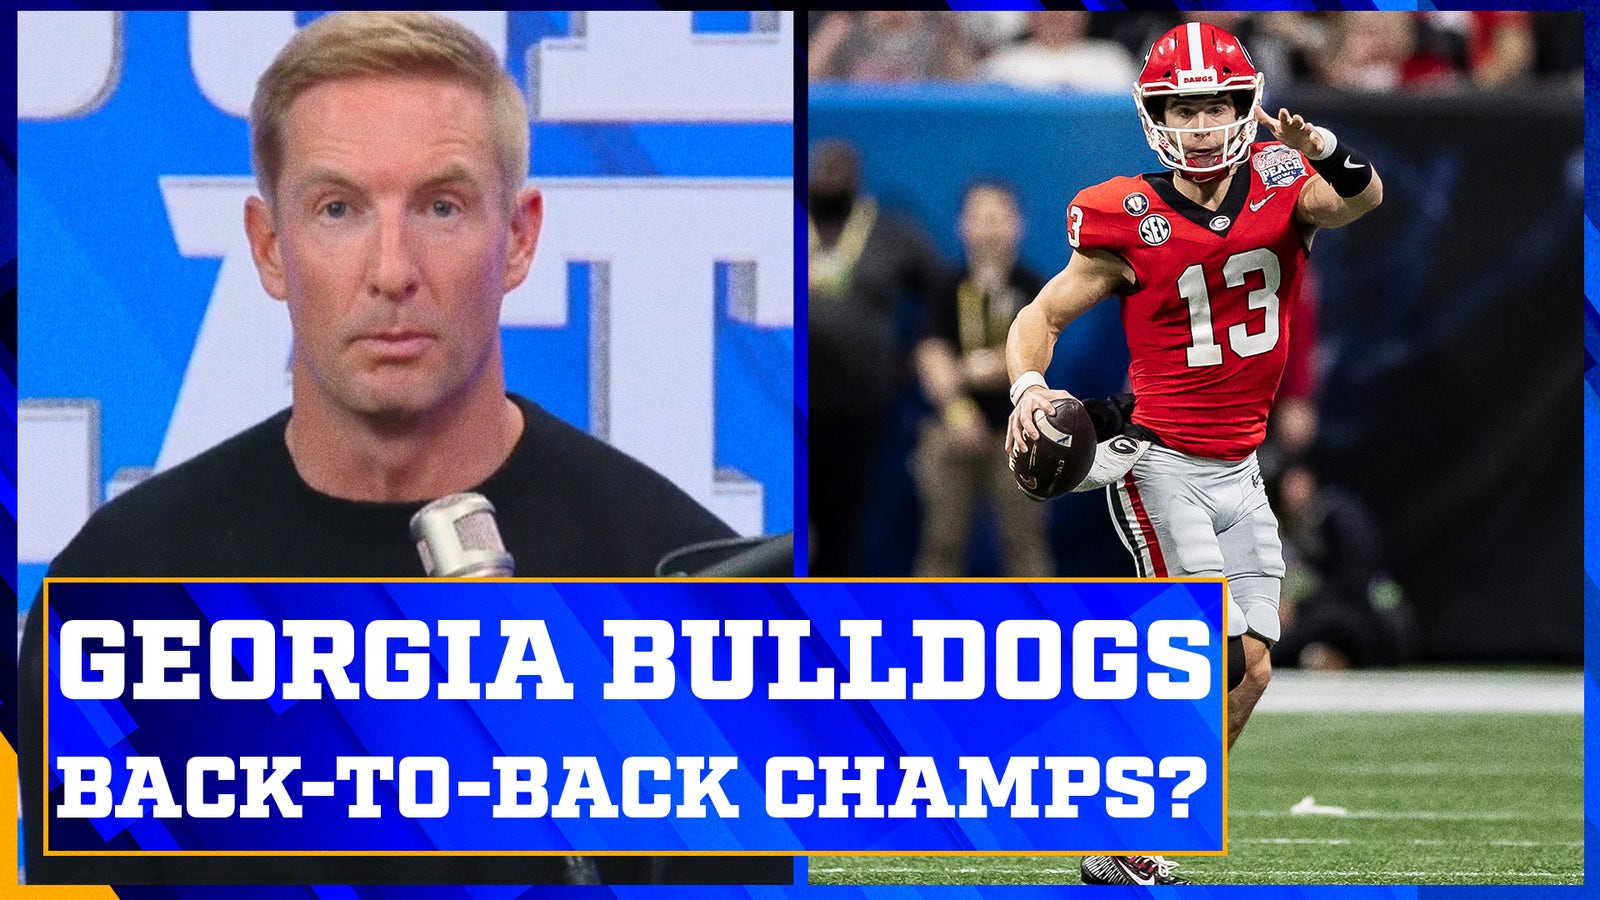 Can Georgia become the national champion?